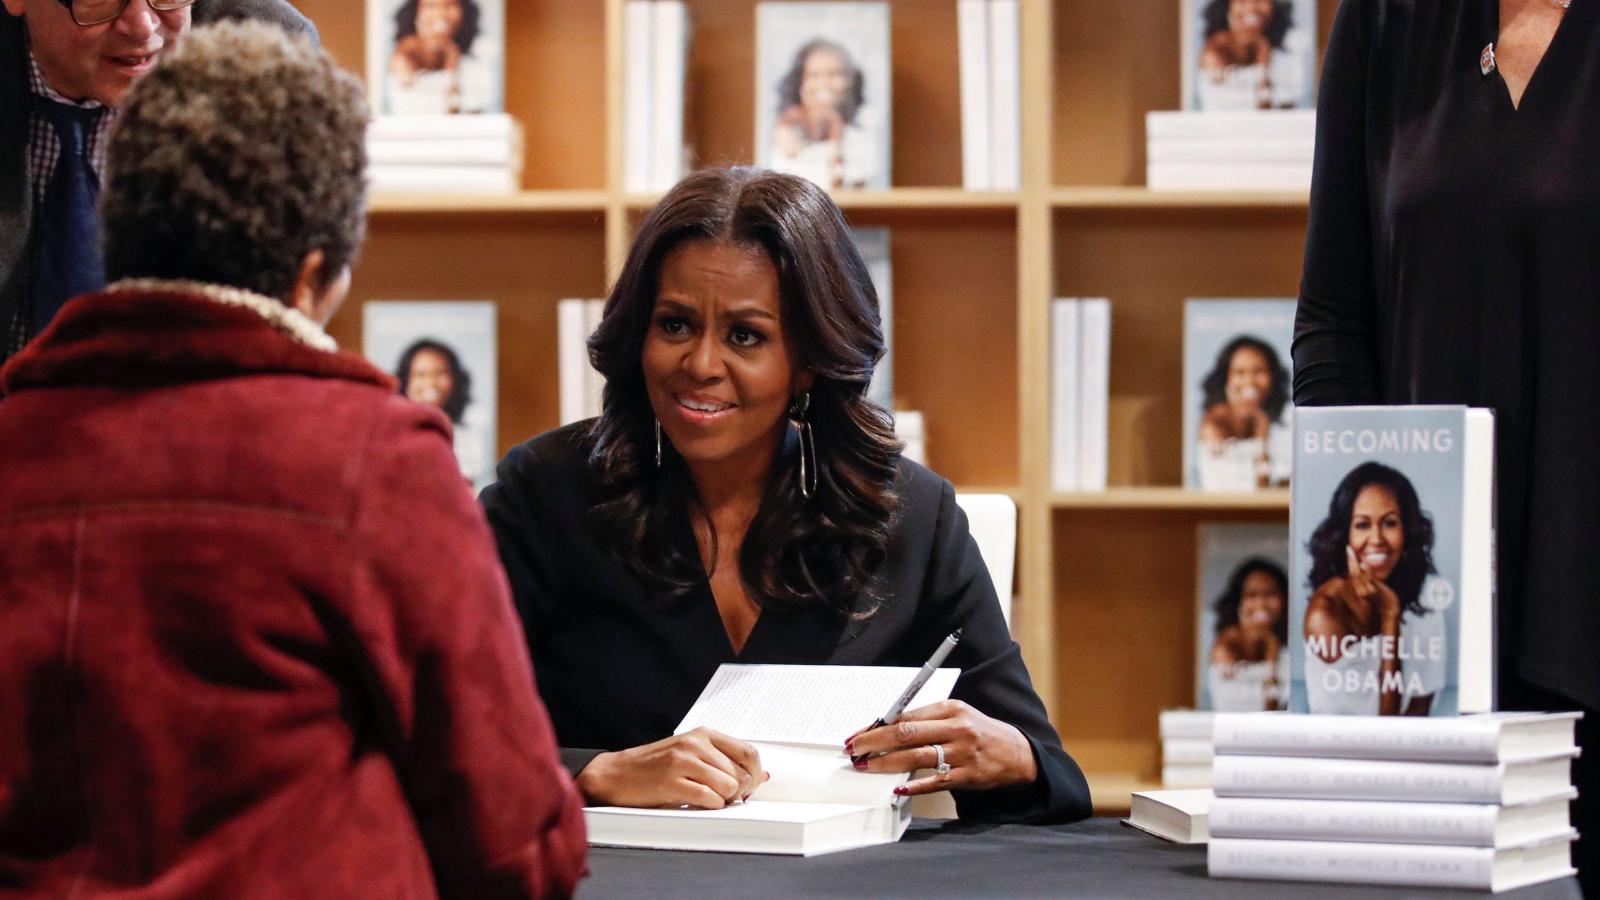 Michelle Obama's “Becoming” already 2018's bestselling book